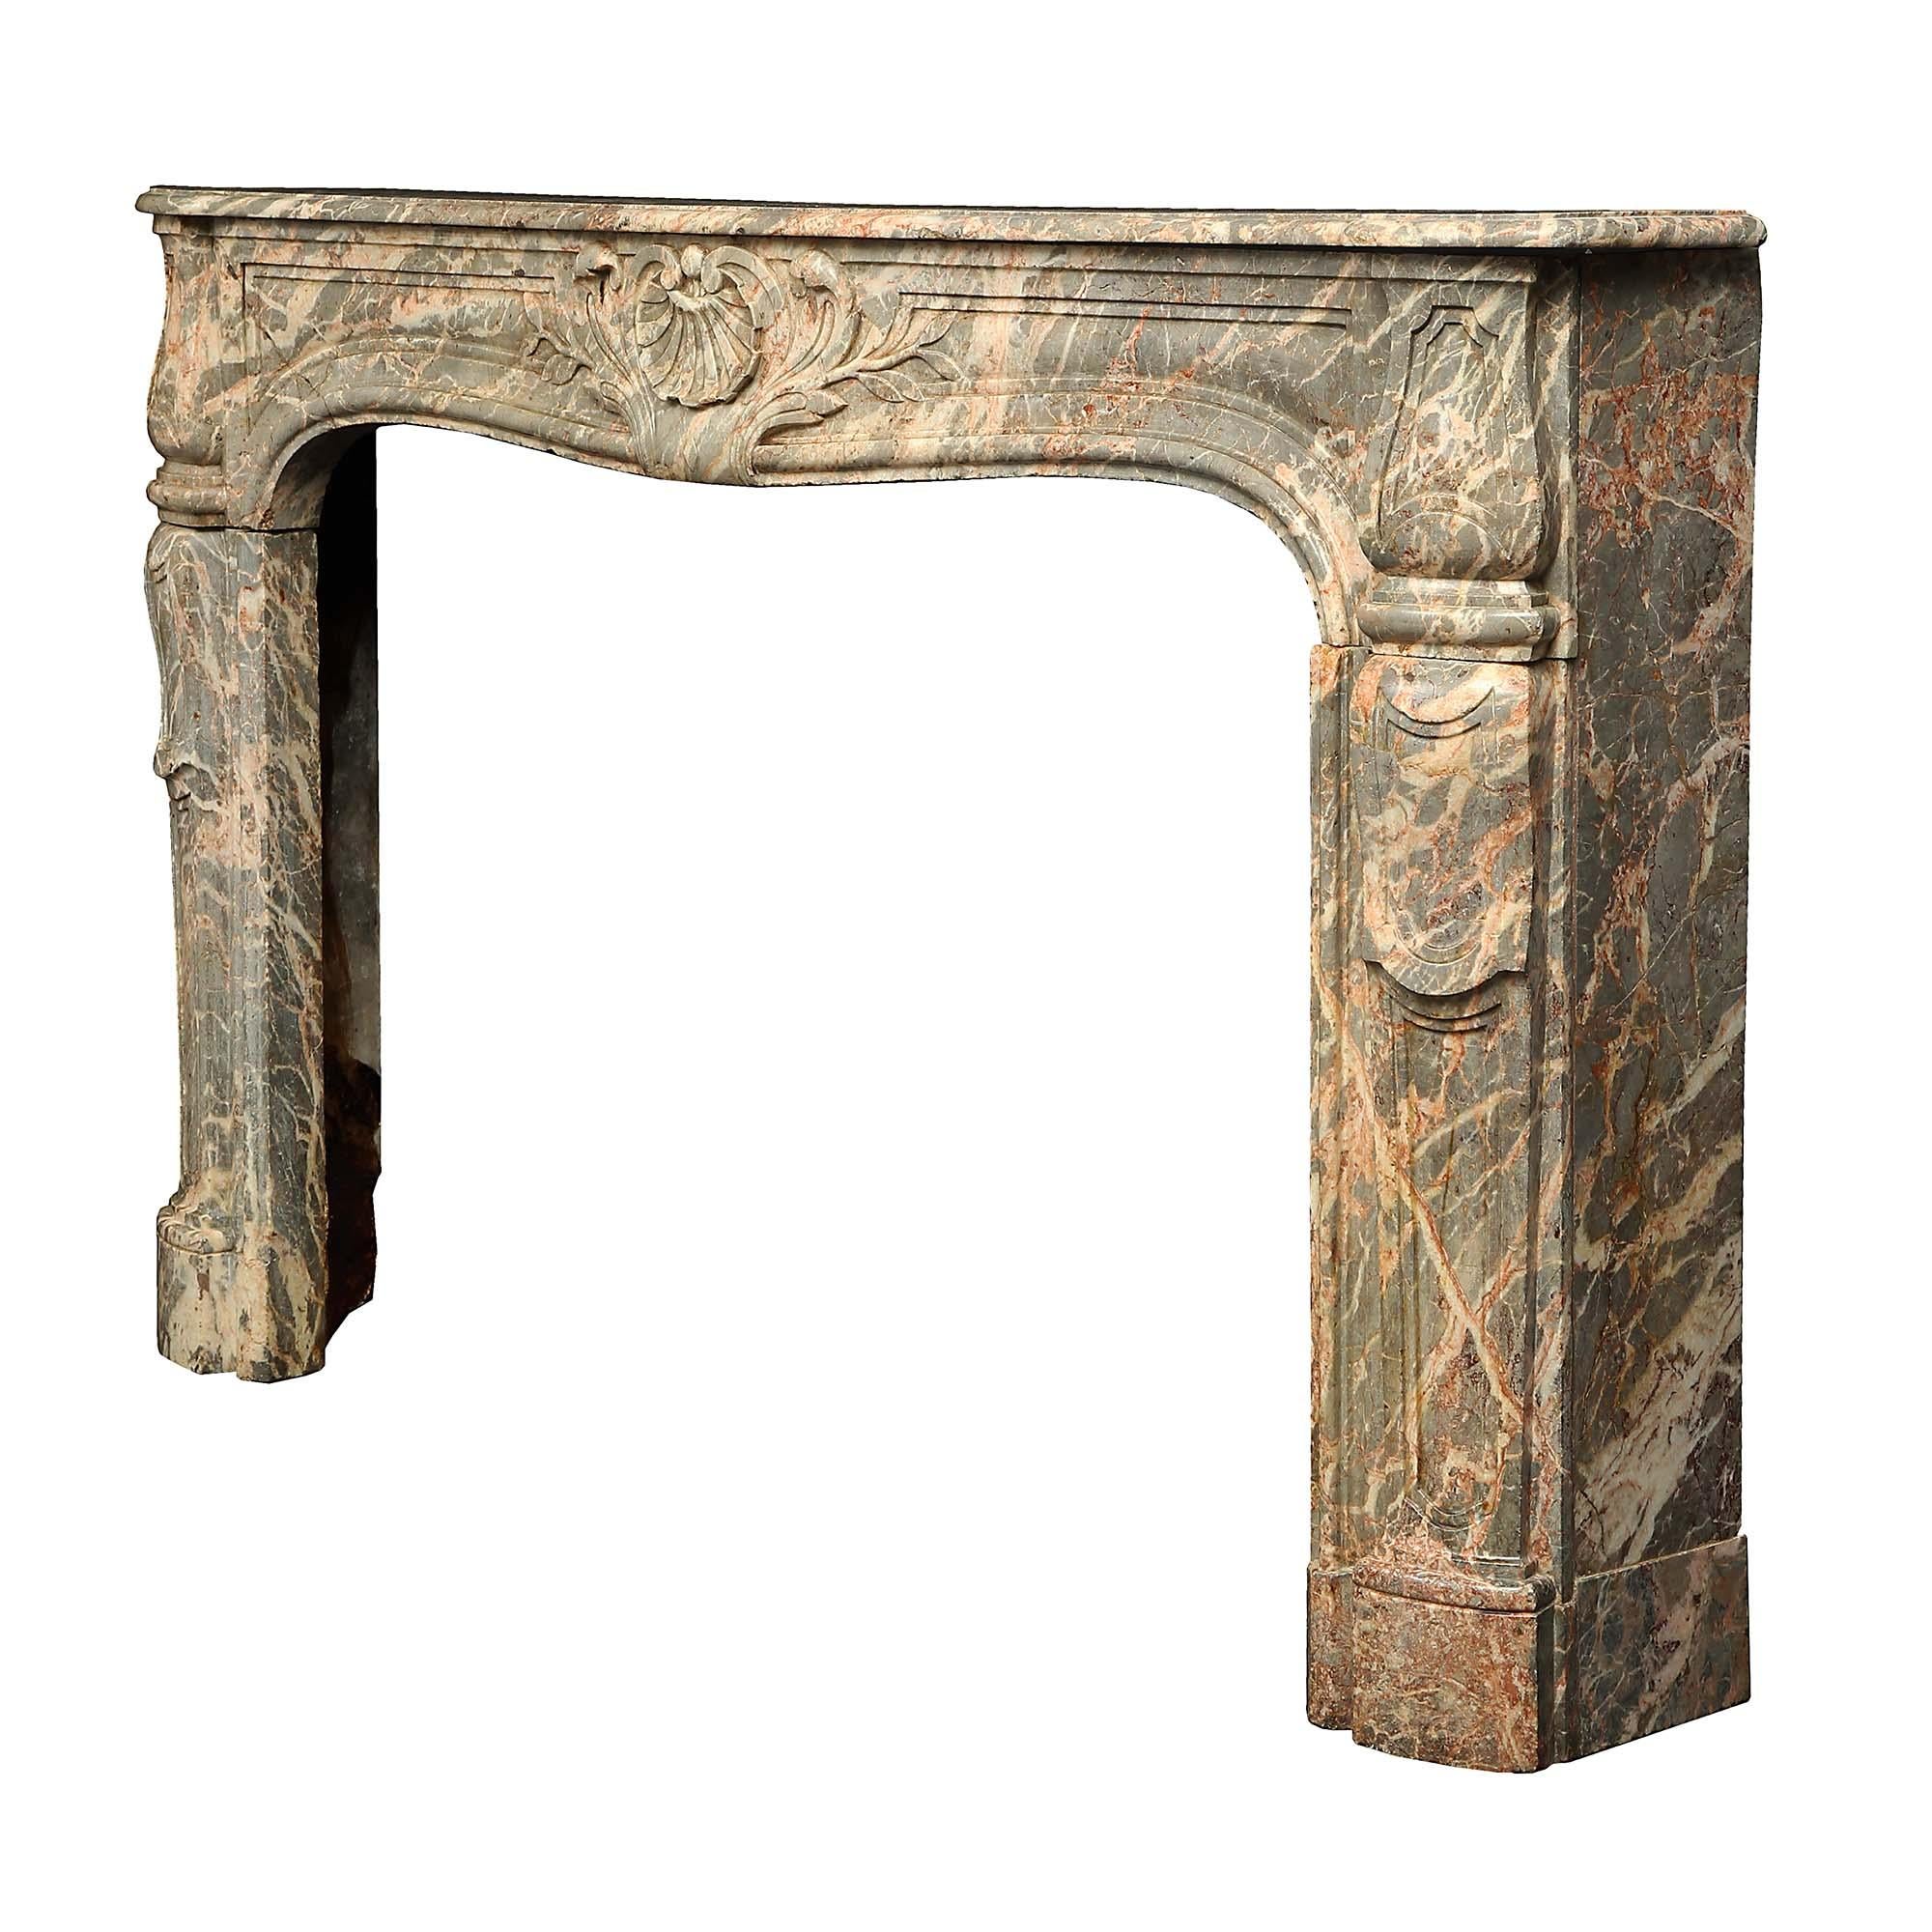 French Late 18th Century Louis XV Period Sarrancolin Marble Mantel In Good Condition For Sale In West Palm Beach, FL